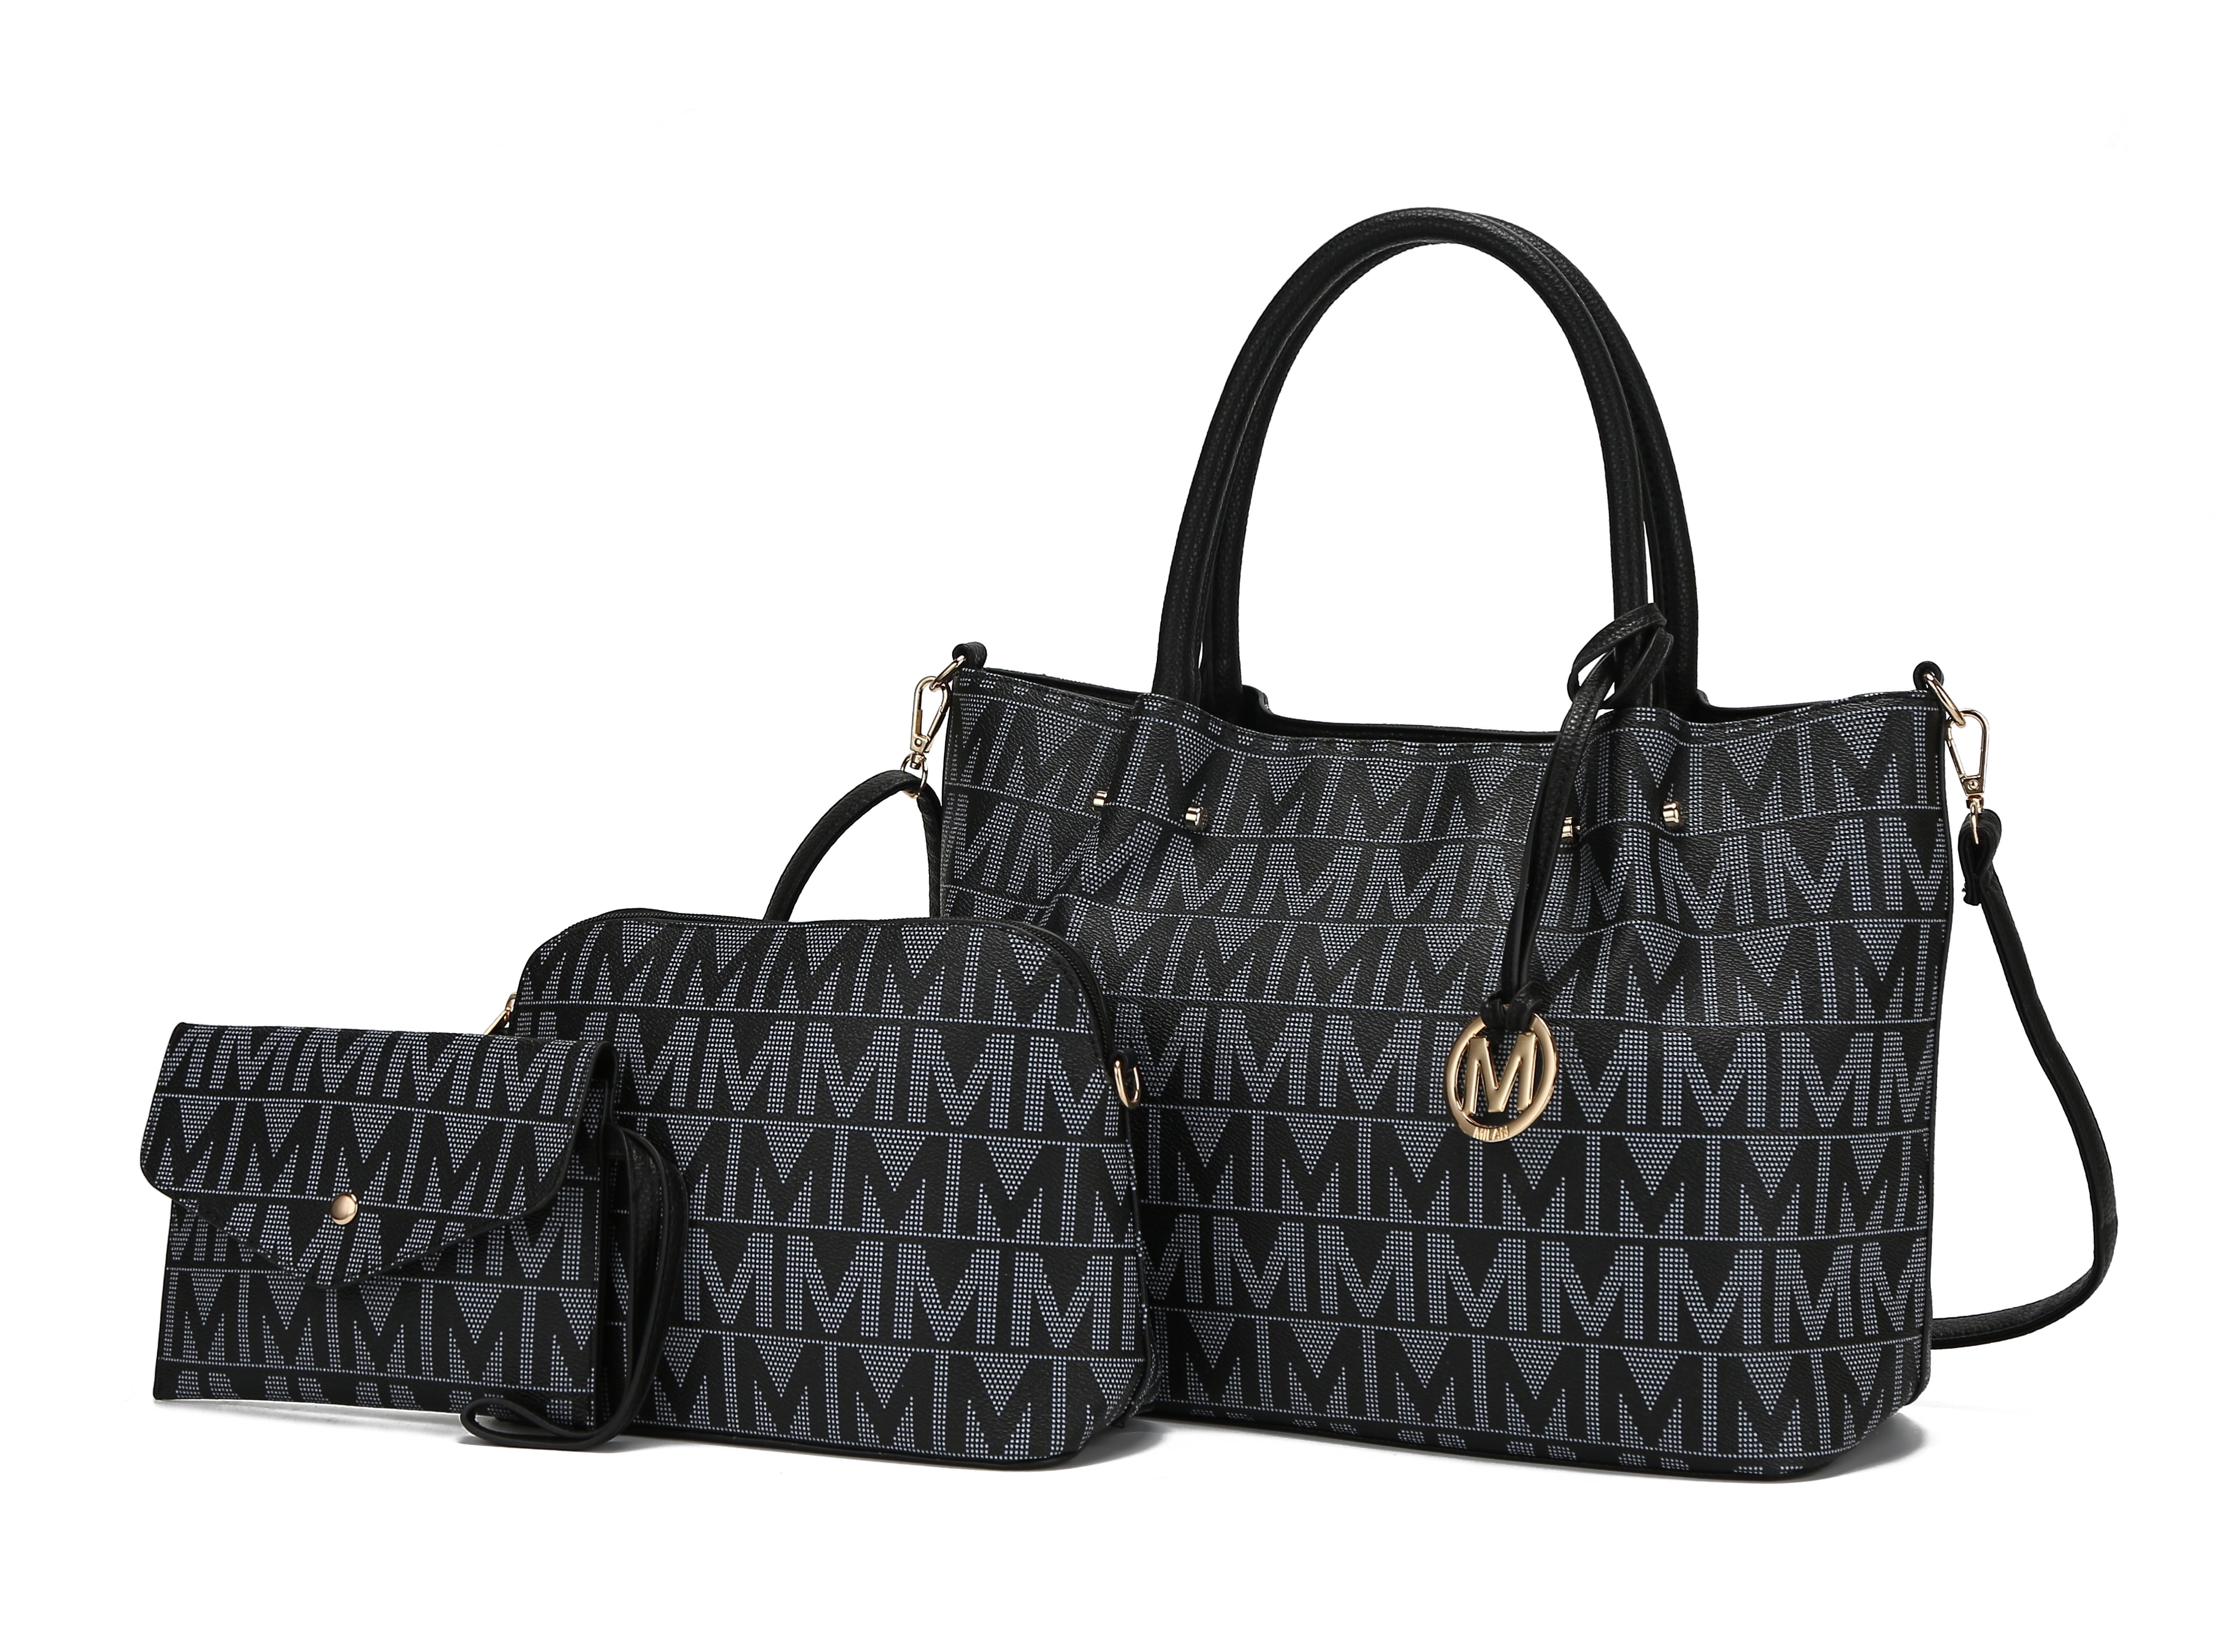 WOMEN'S HANDBAG TOTE Black and White 2pc Tote and Pouch Set Was $39.99 